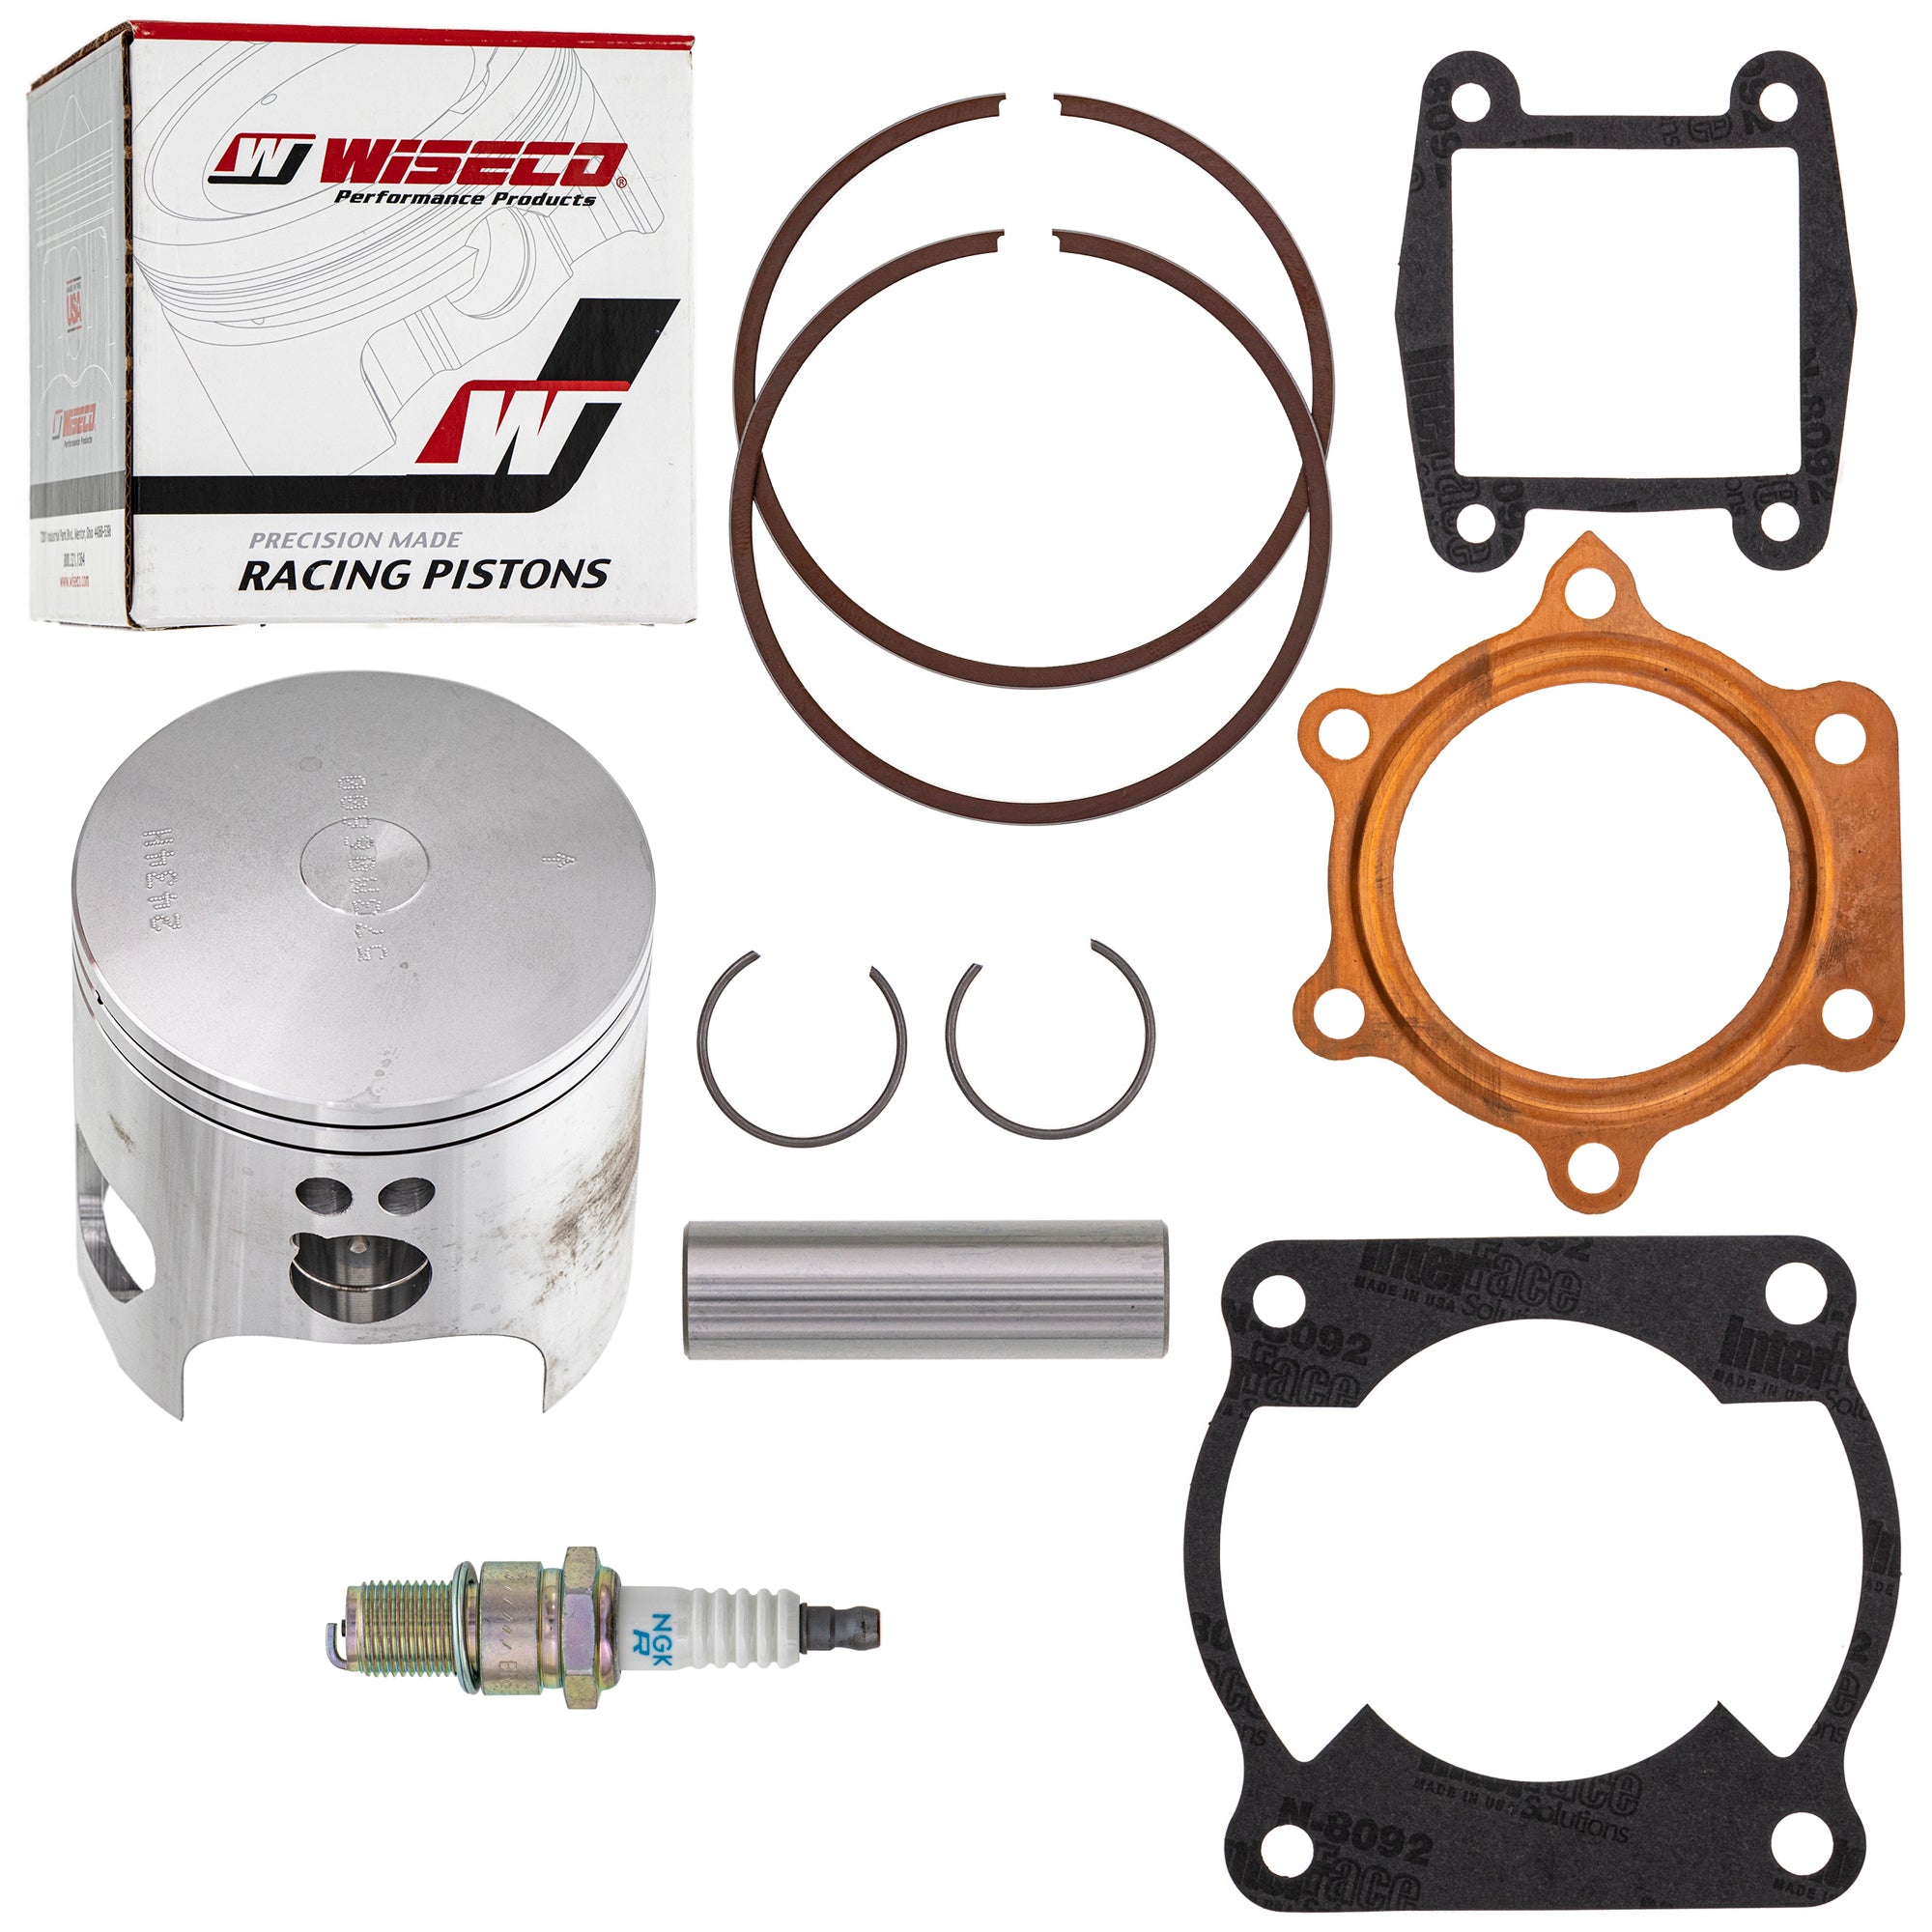 Gasket Wiseco Piston Rings Top End Kit for Yamaha Blaster NICHE MK1012183